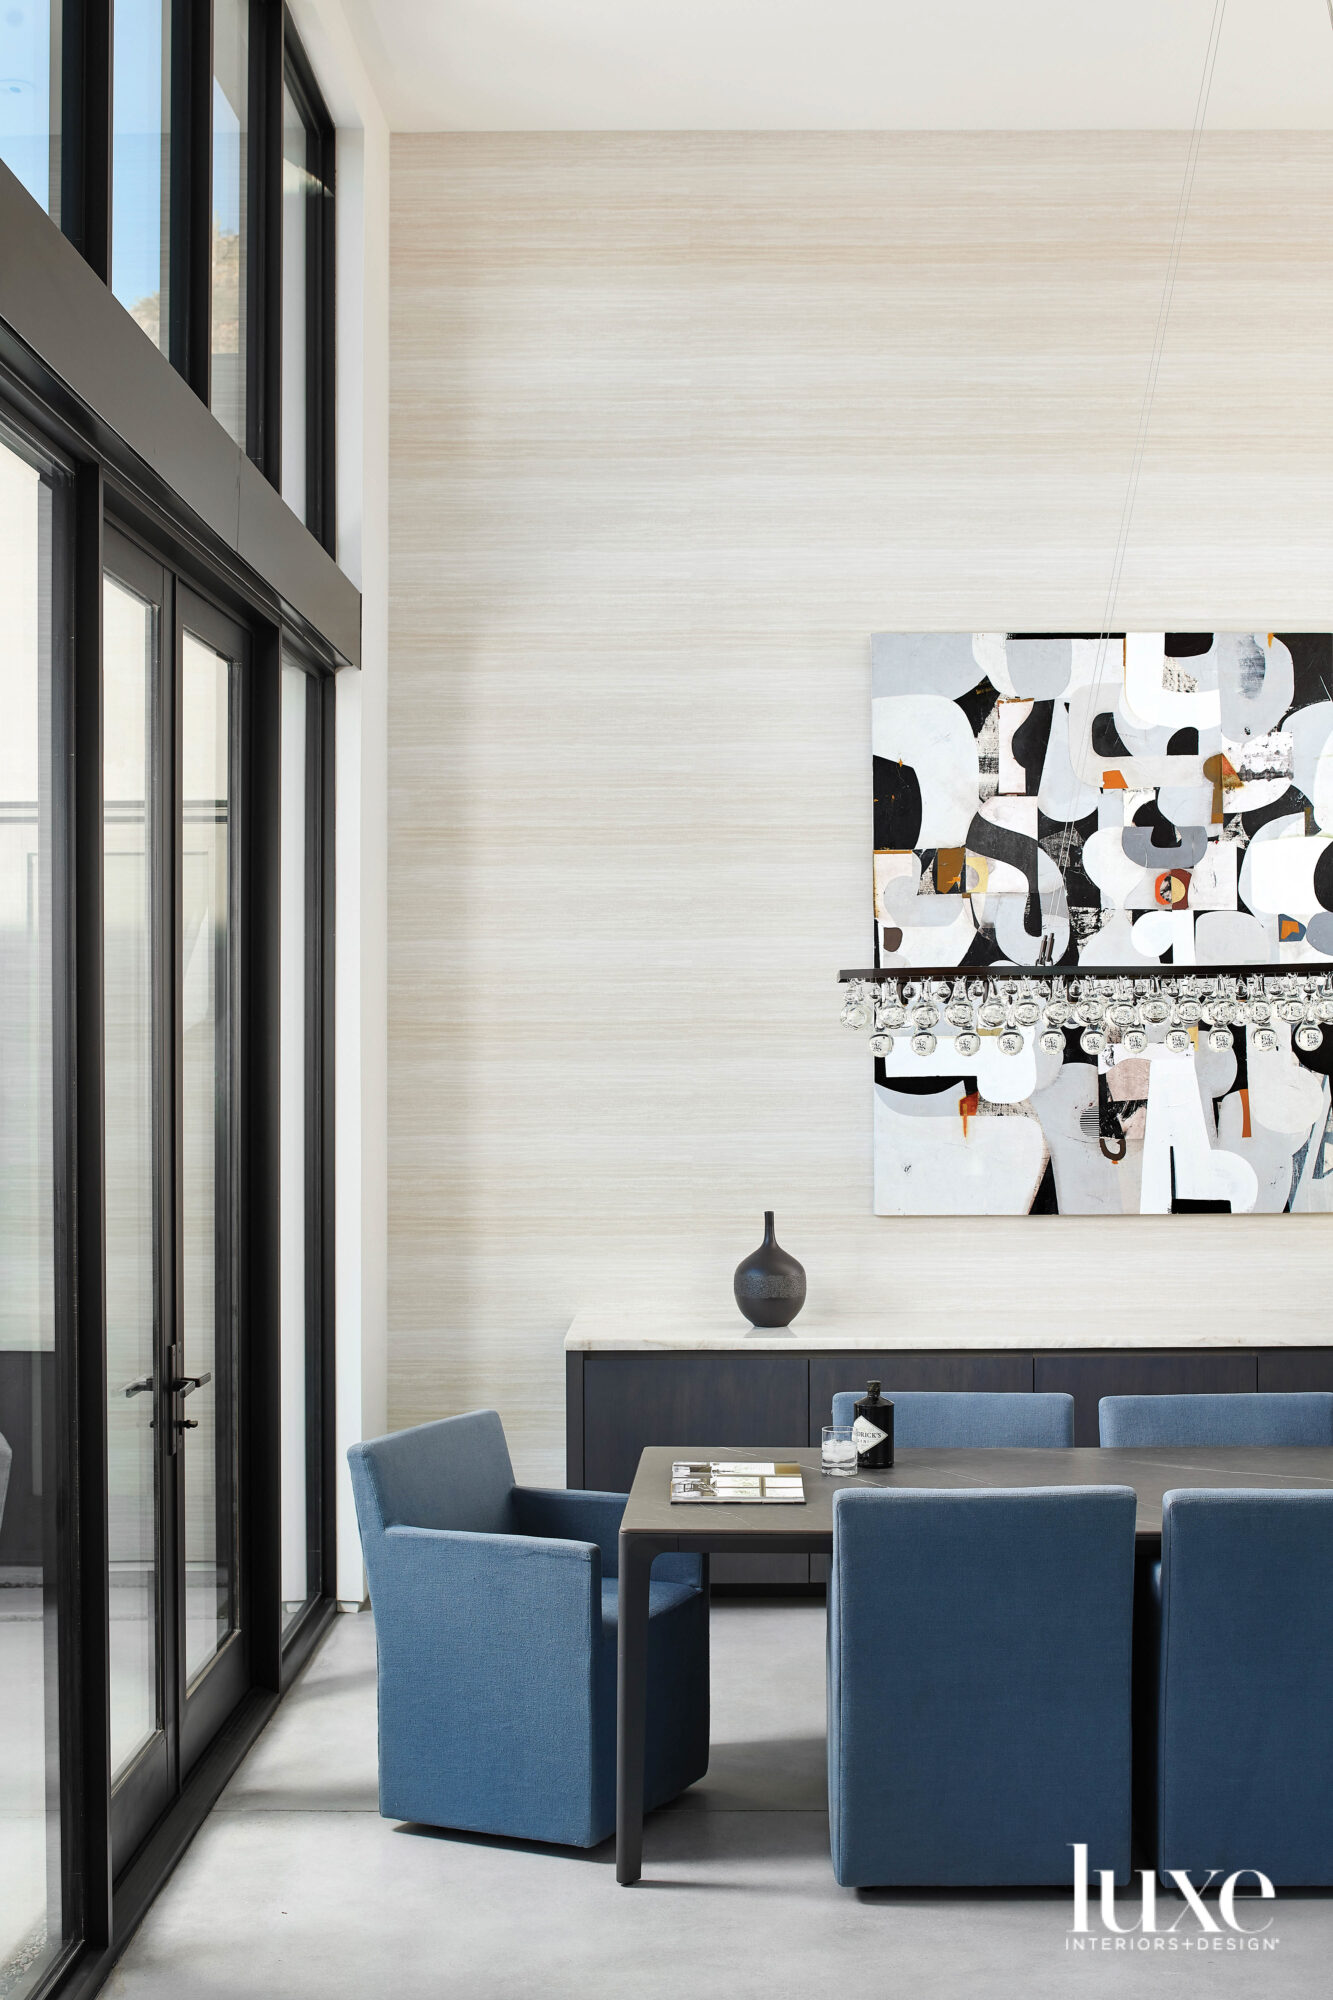 In the dining room, an abstract painting hangs behind a large black dining table surrounded by blue upholstered chairs.